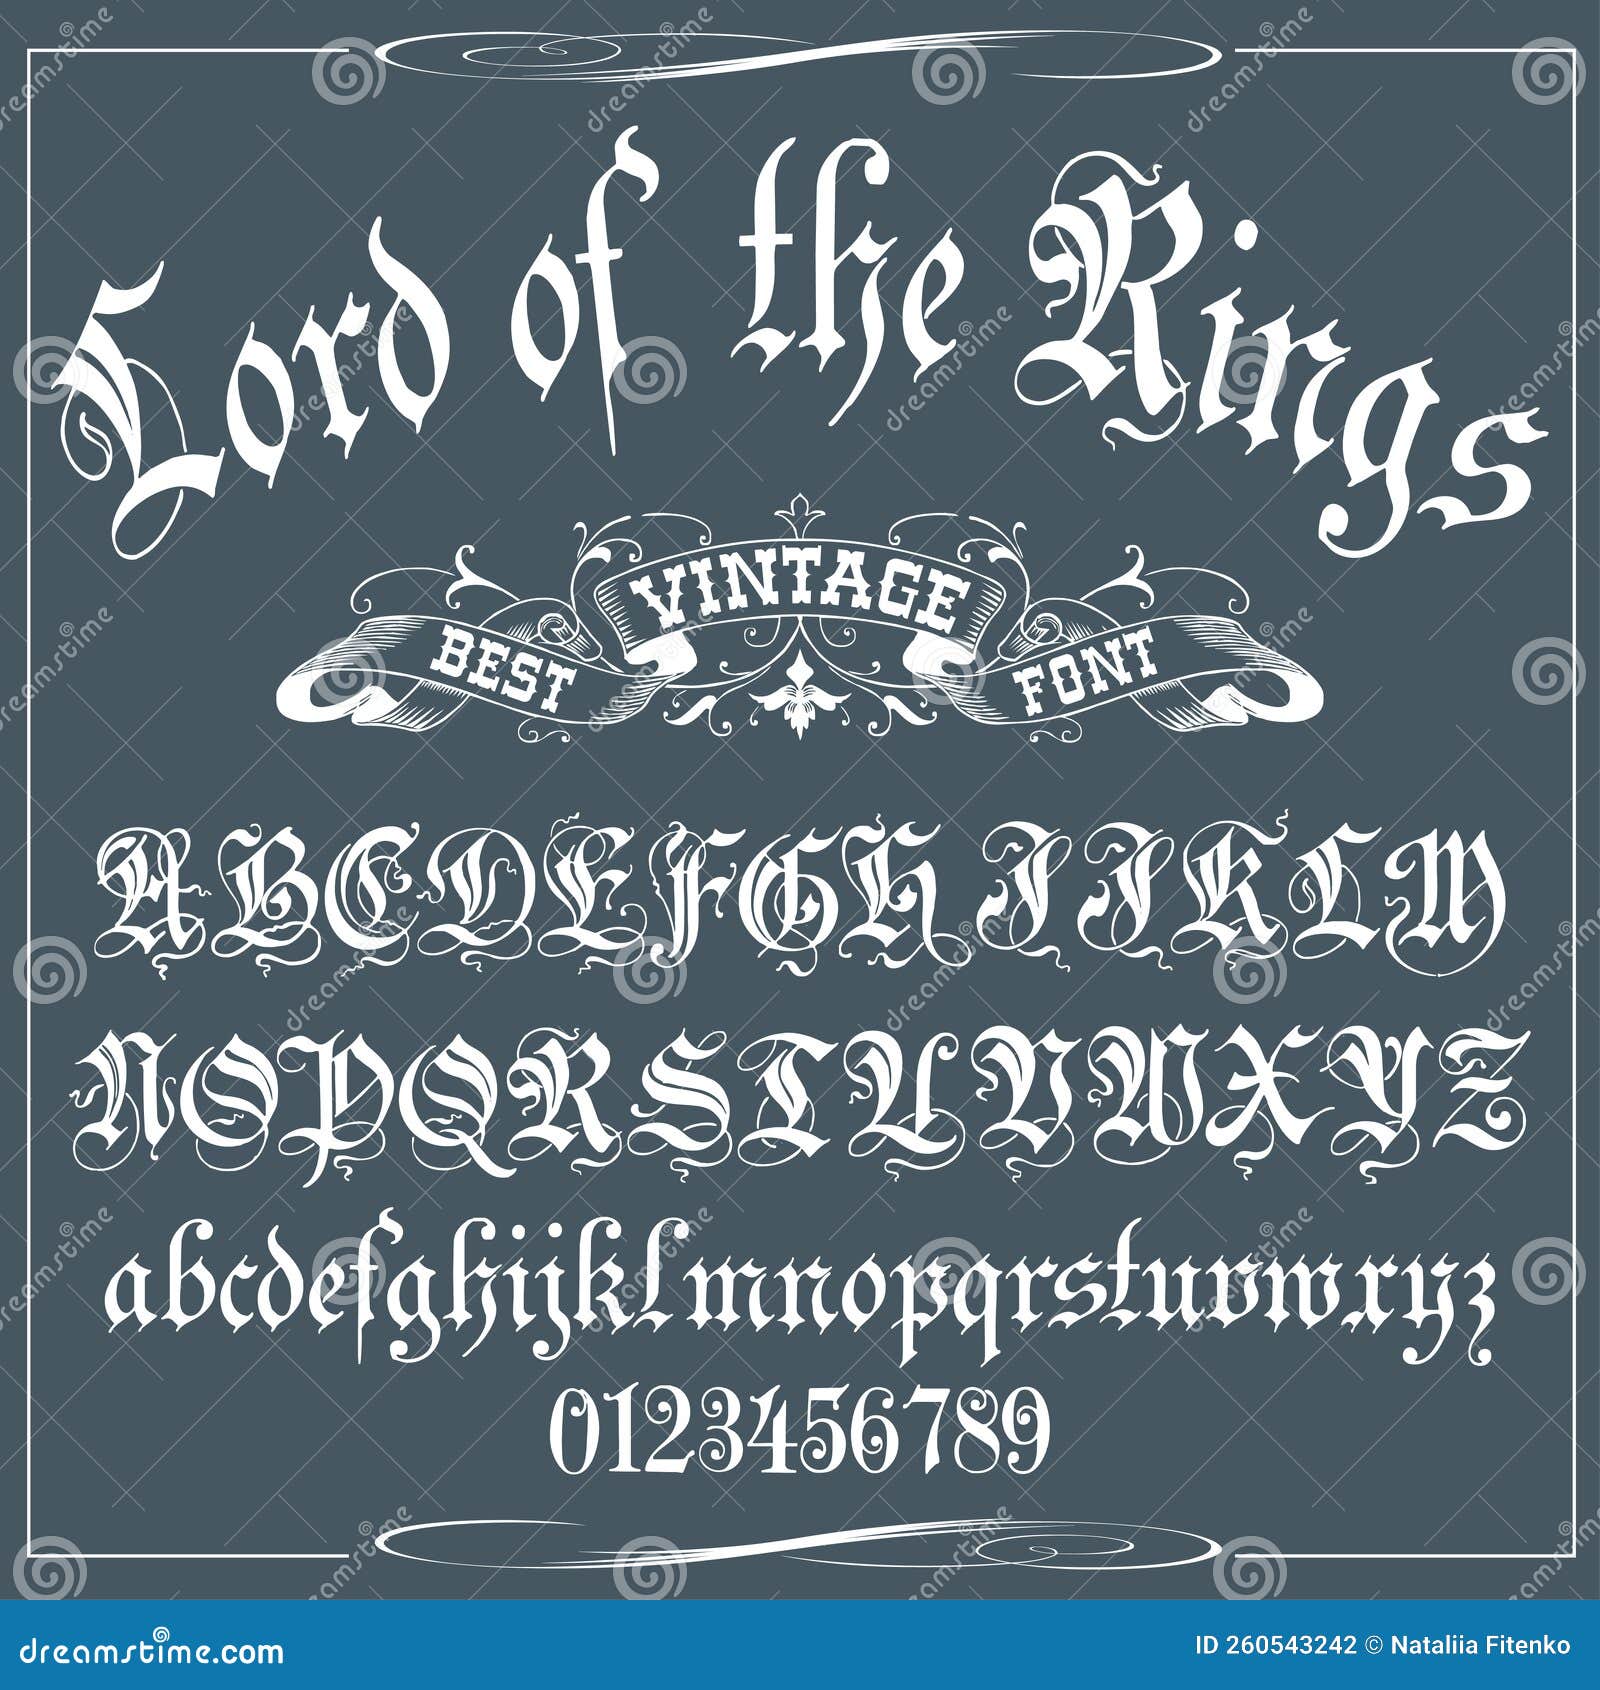 Lord of the Rings Font | BreeCraft